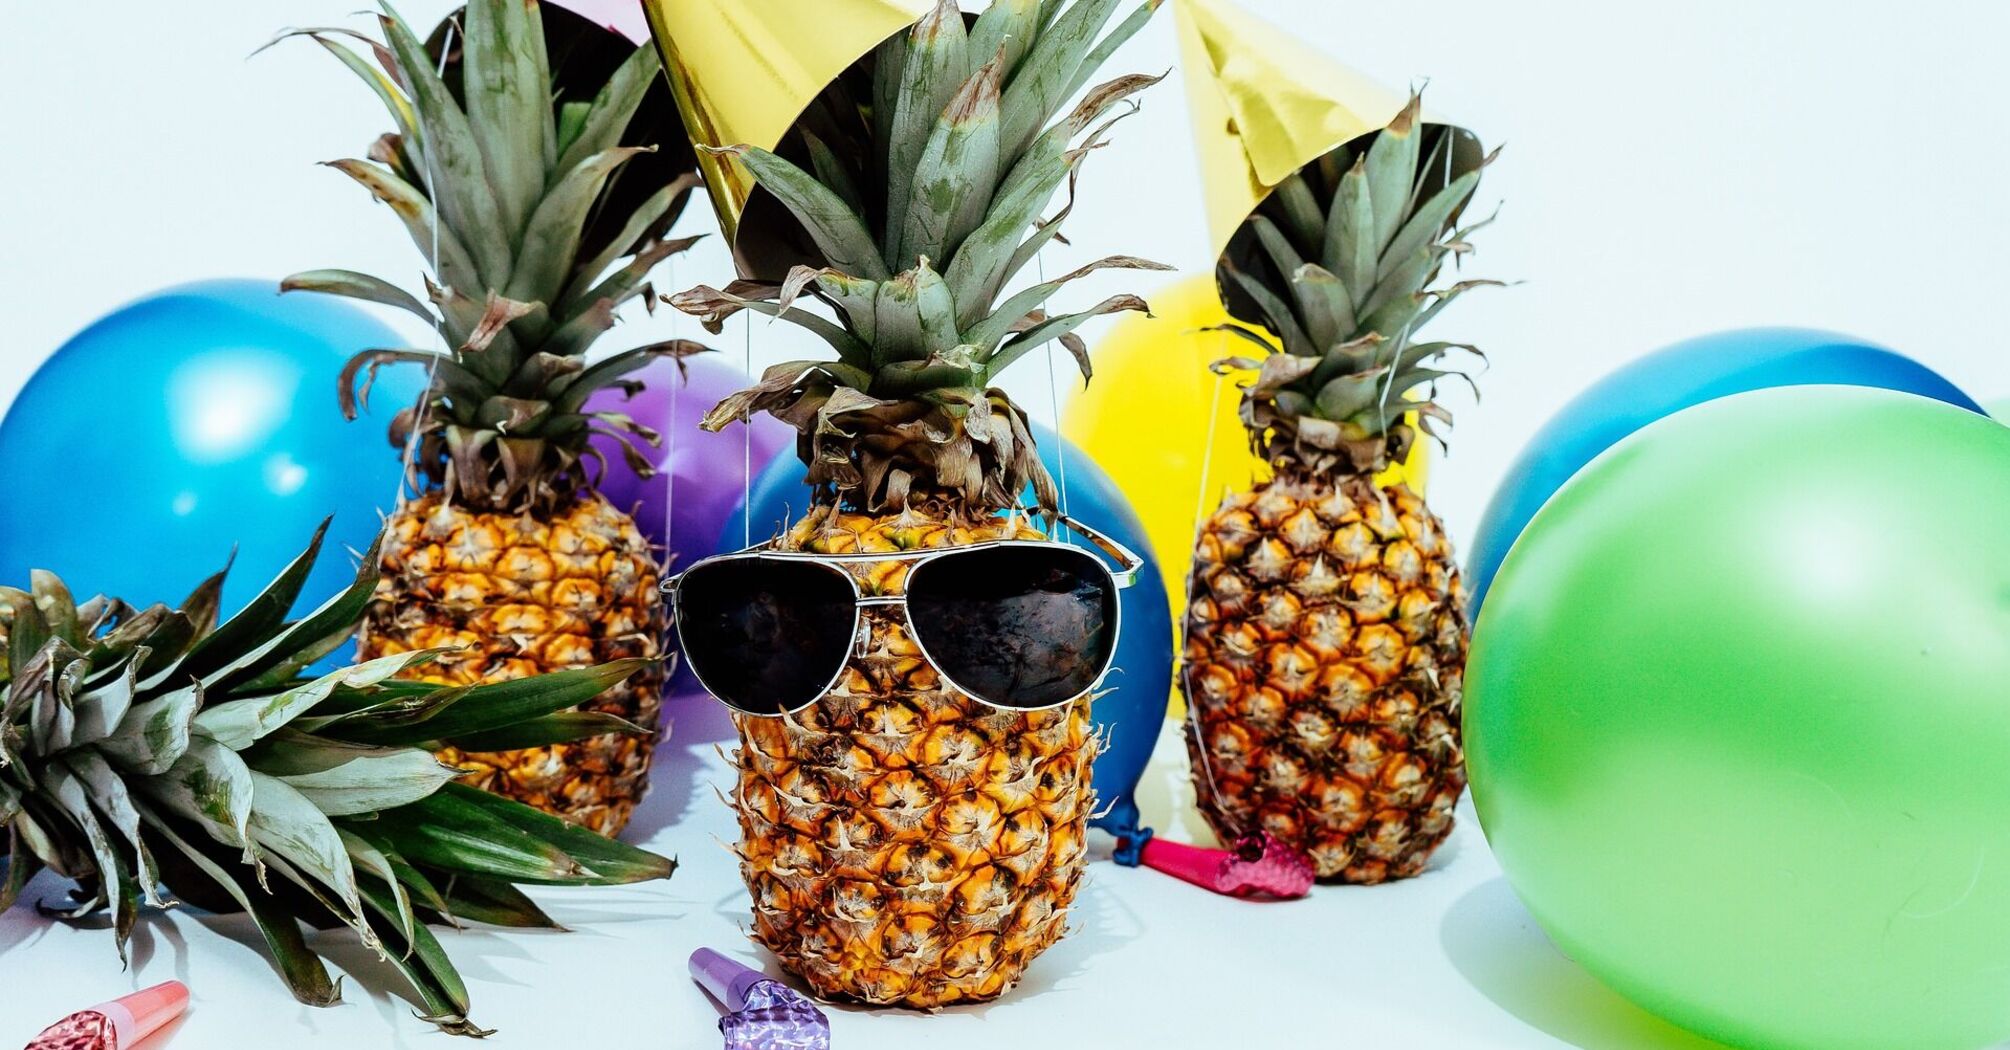 A pineapple with sunglasses surrounded by colorful balloons and party favors, suggesting a festive or celebratory mood